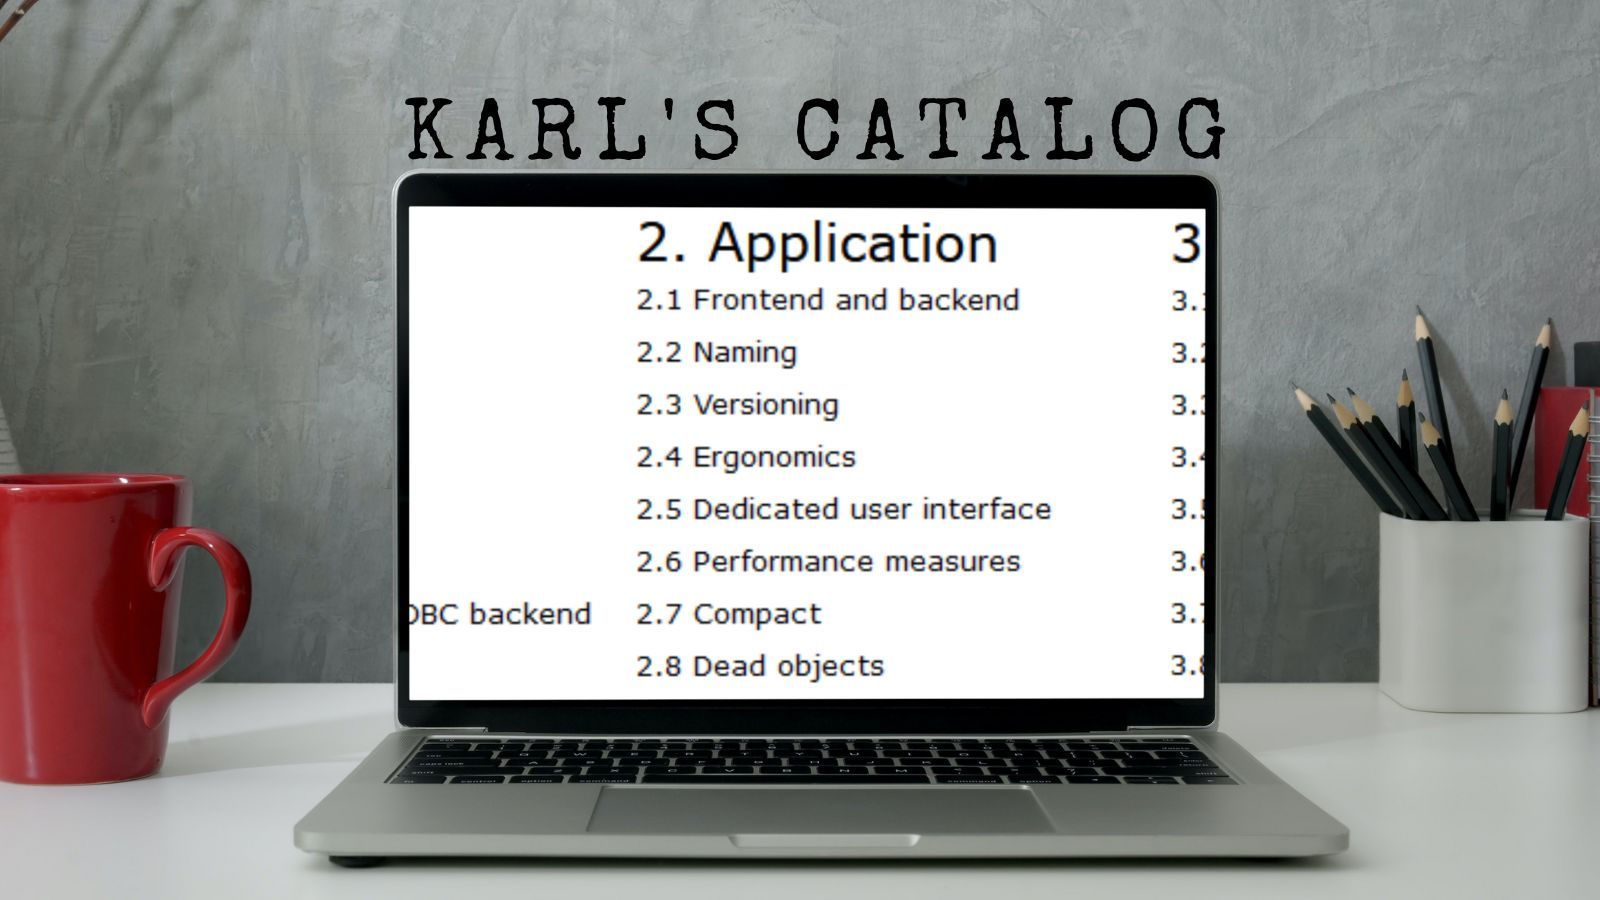 Karl's Catalog: A Checklist of Access Best Practices